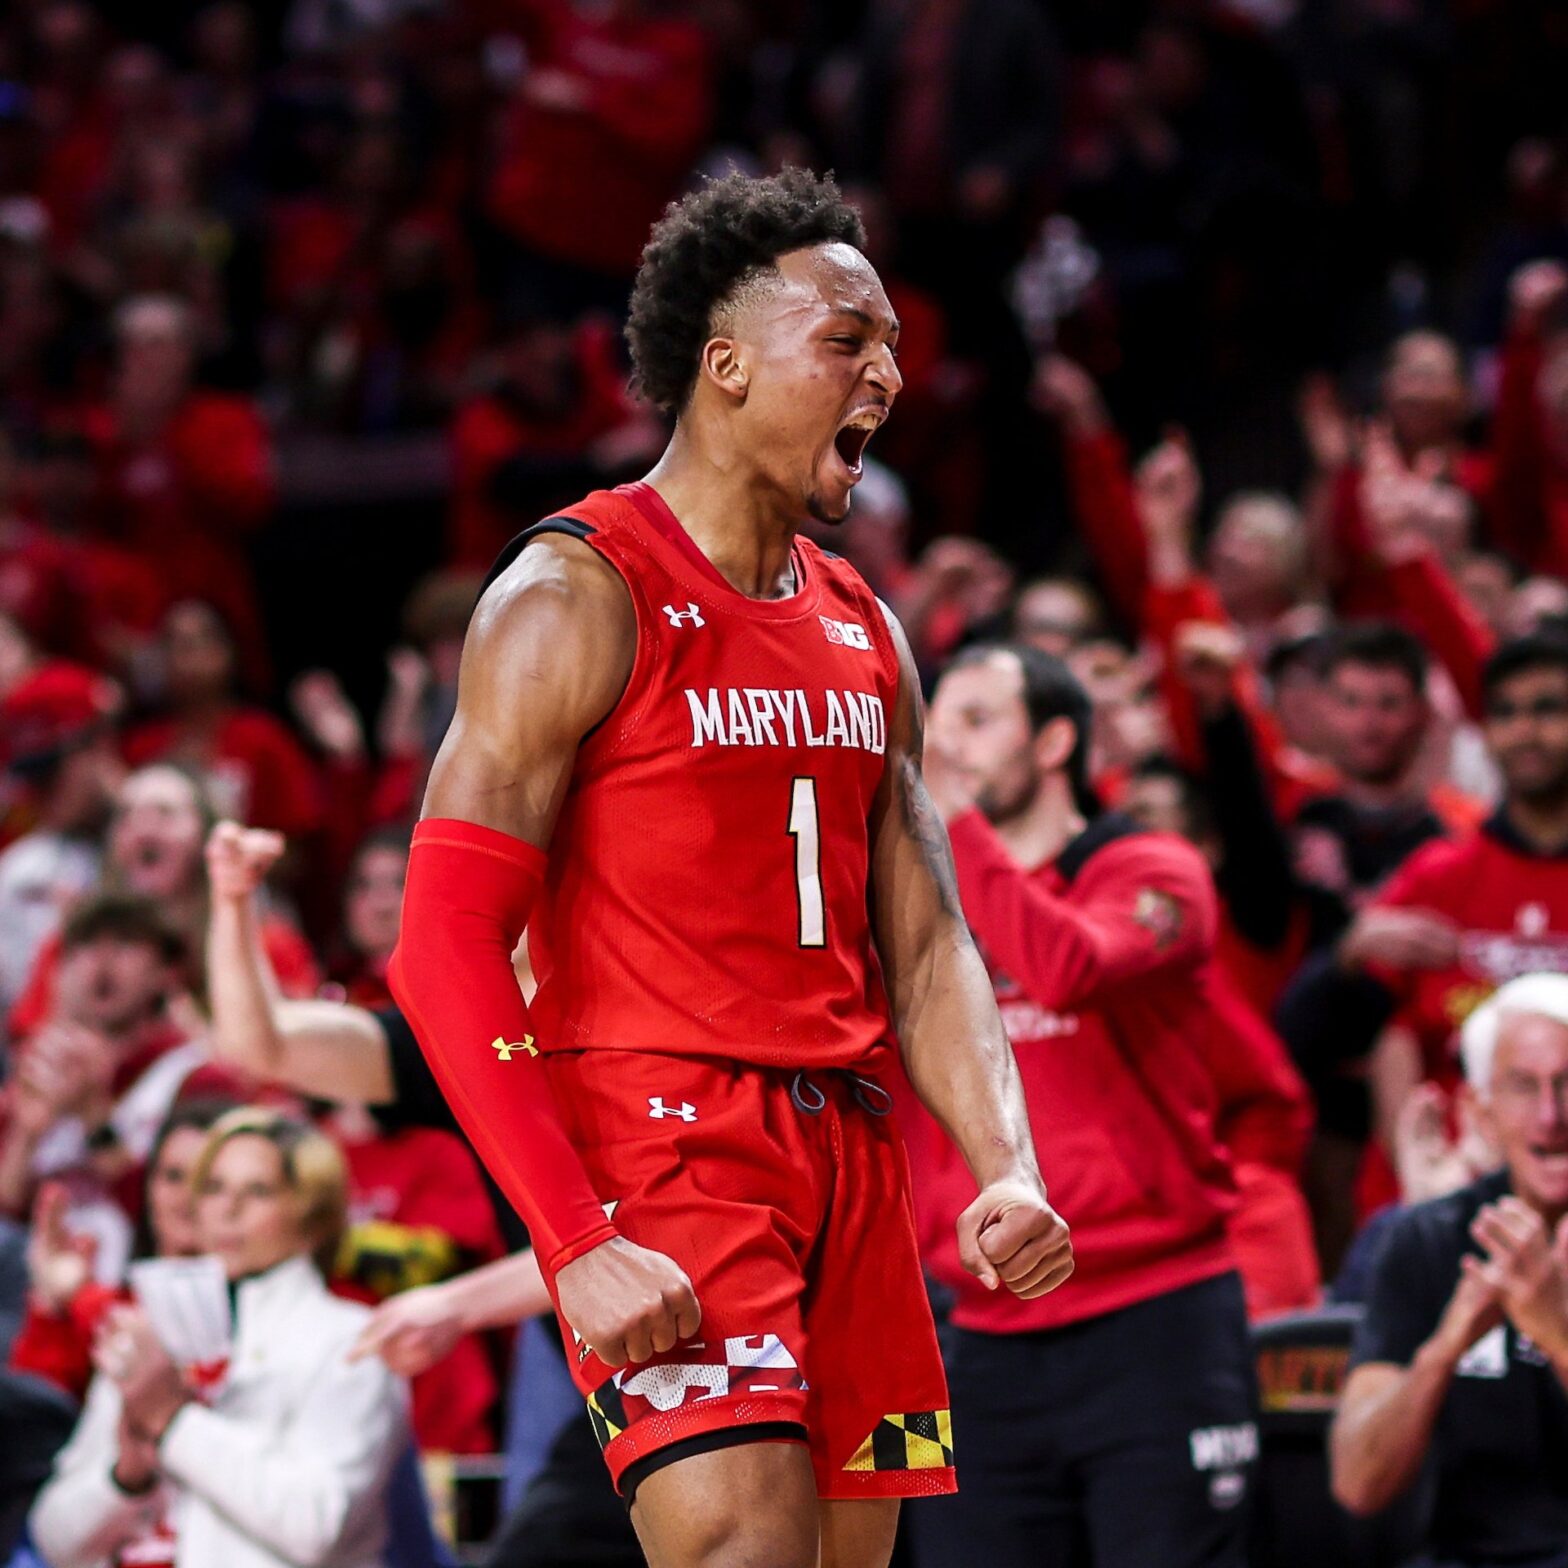 Jahmir Young shows excitement during the Maryland basketball game vs Penn State